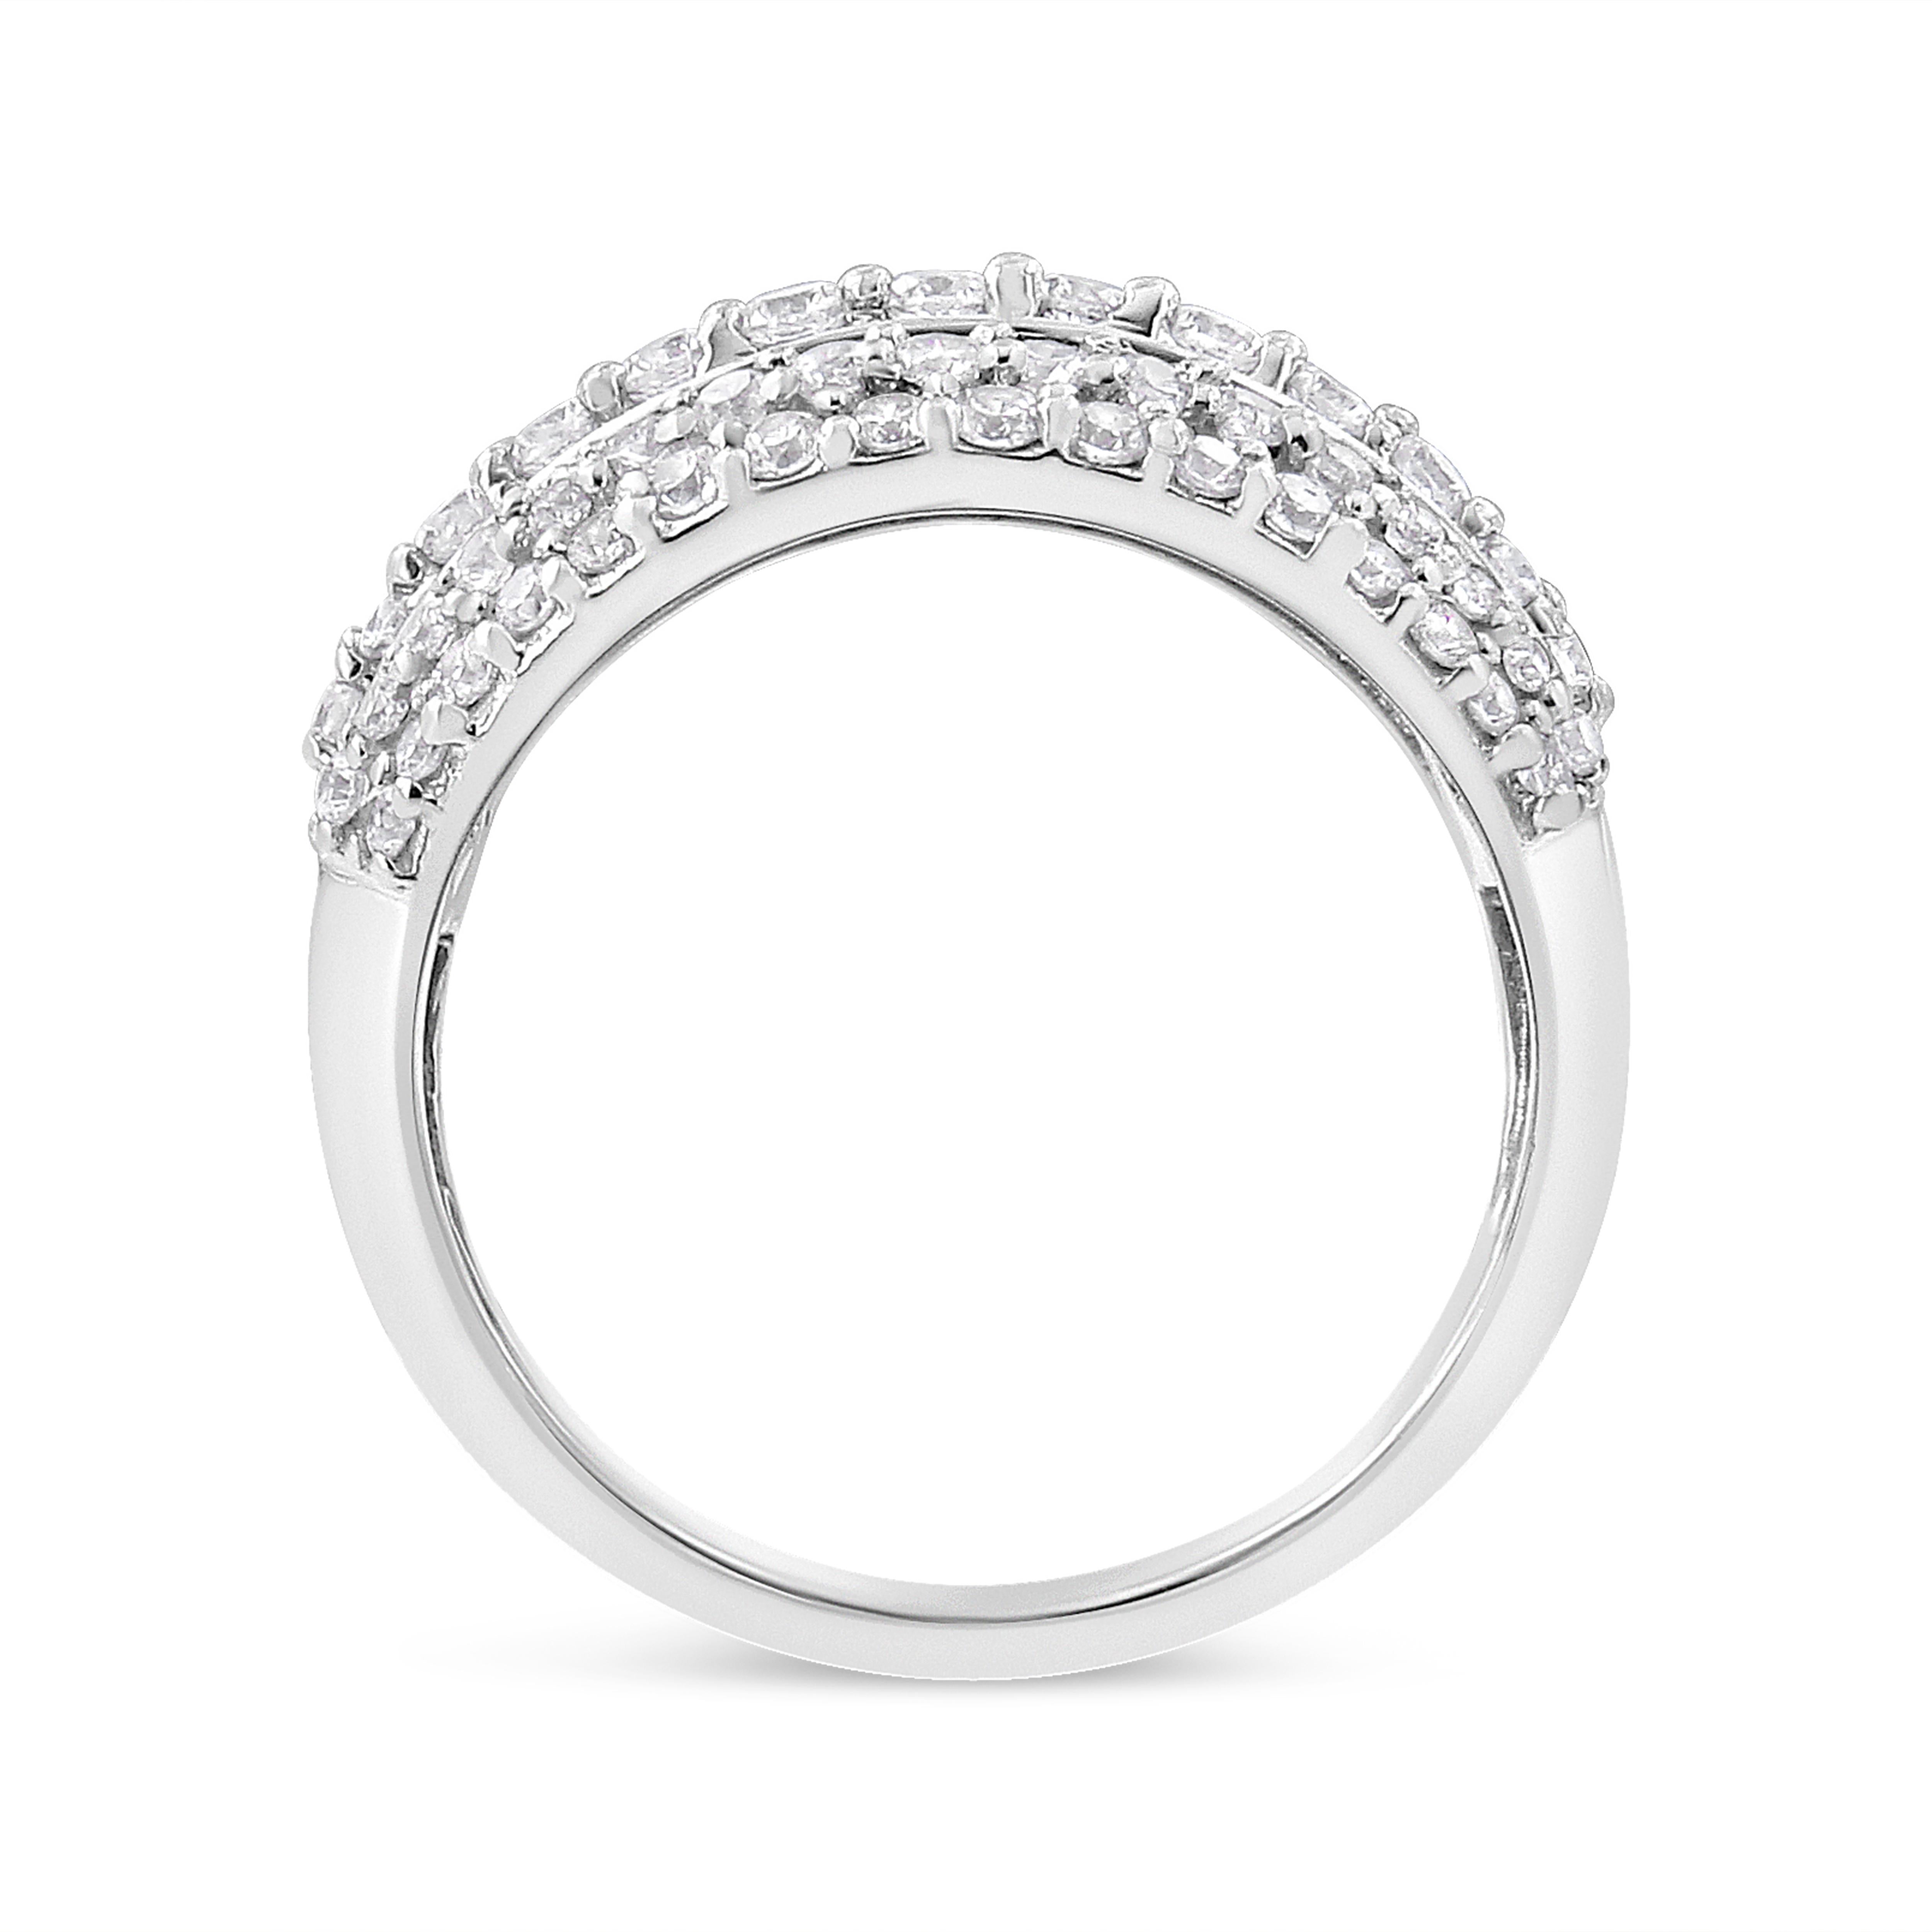 For Sale:  .925 Sterling Silver 2.0 Carat Round and Baguette-Cut Diamond Cluster Ring 4